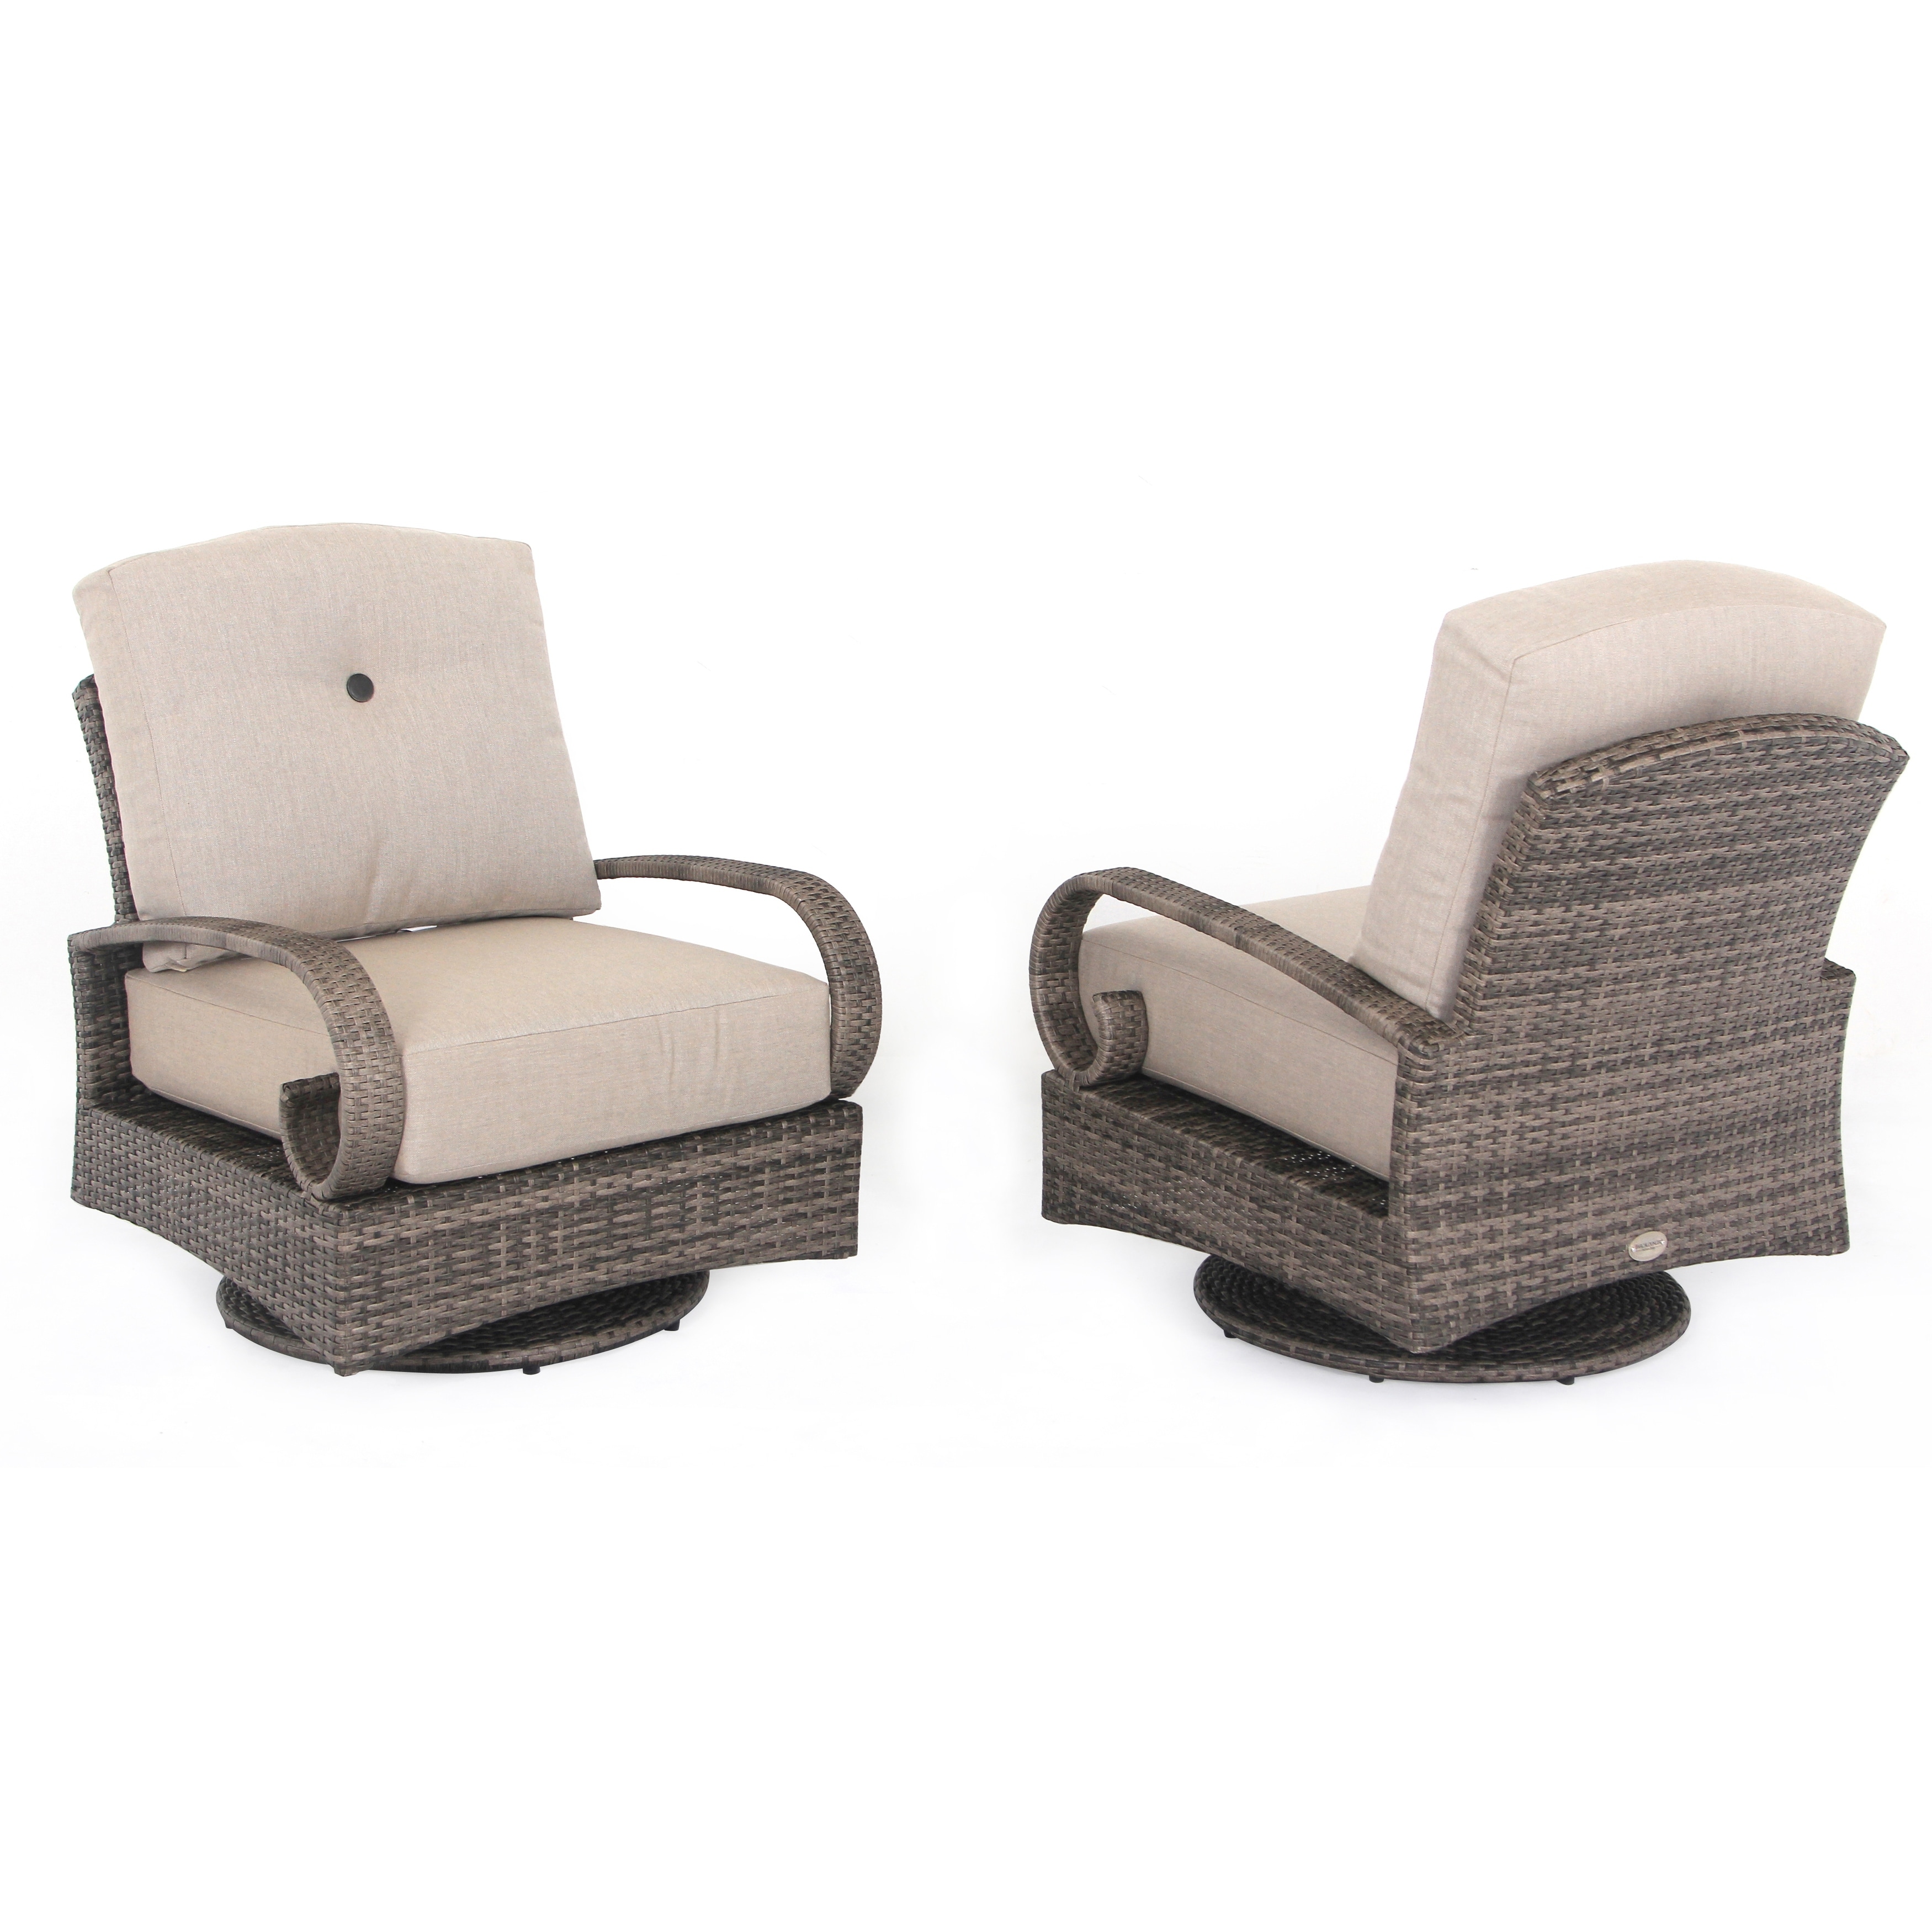 Barcalounger Outdoor Living Captiva Isle Wicker And Aluminum Swivel Rocking Lounge Chairs (set Of 2)